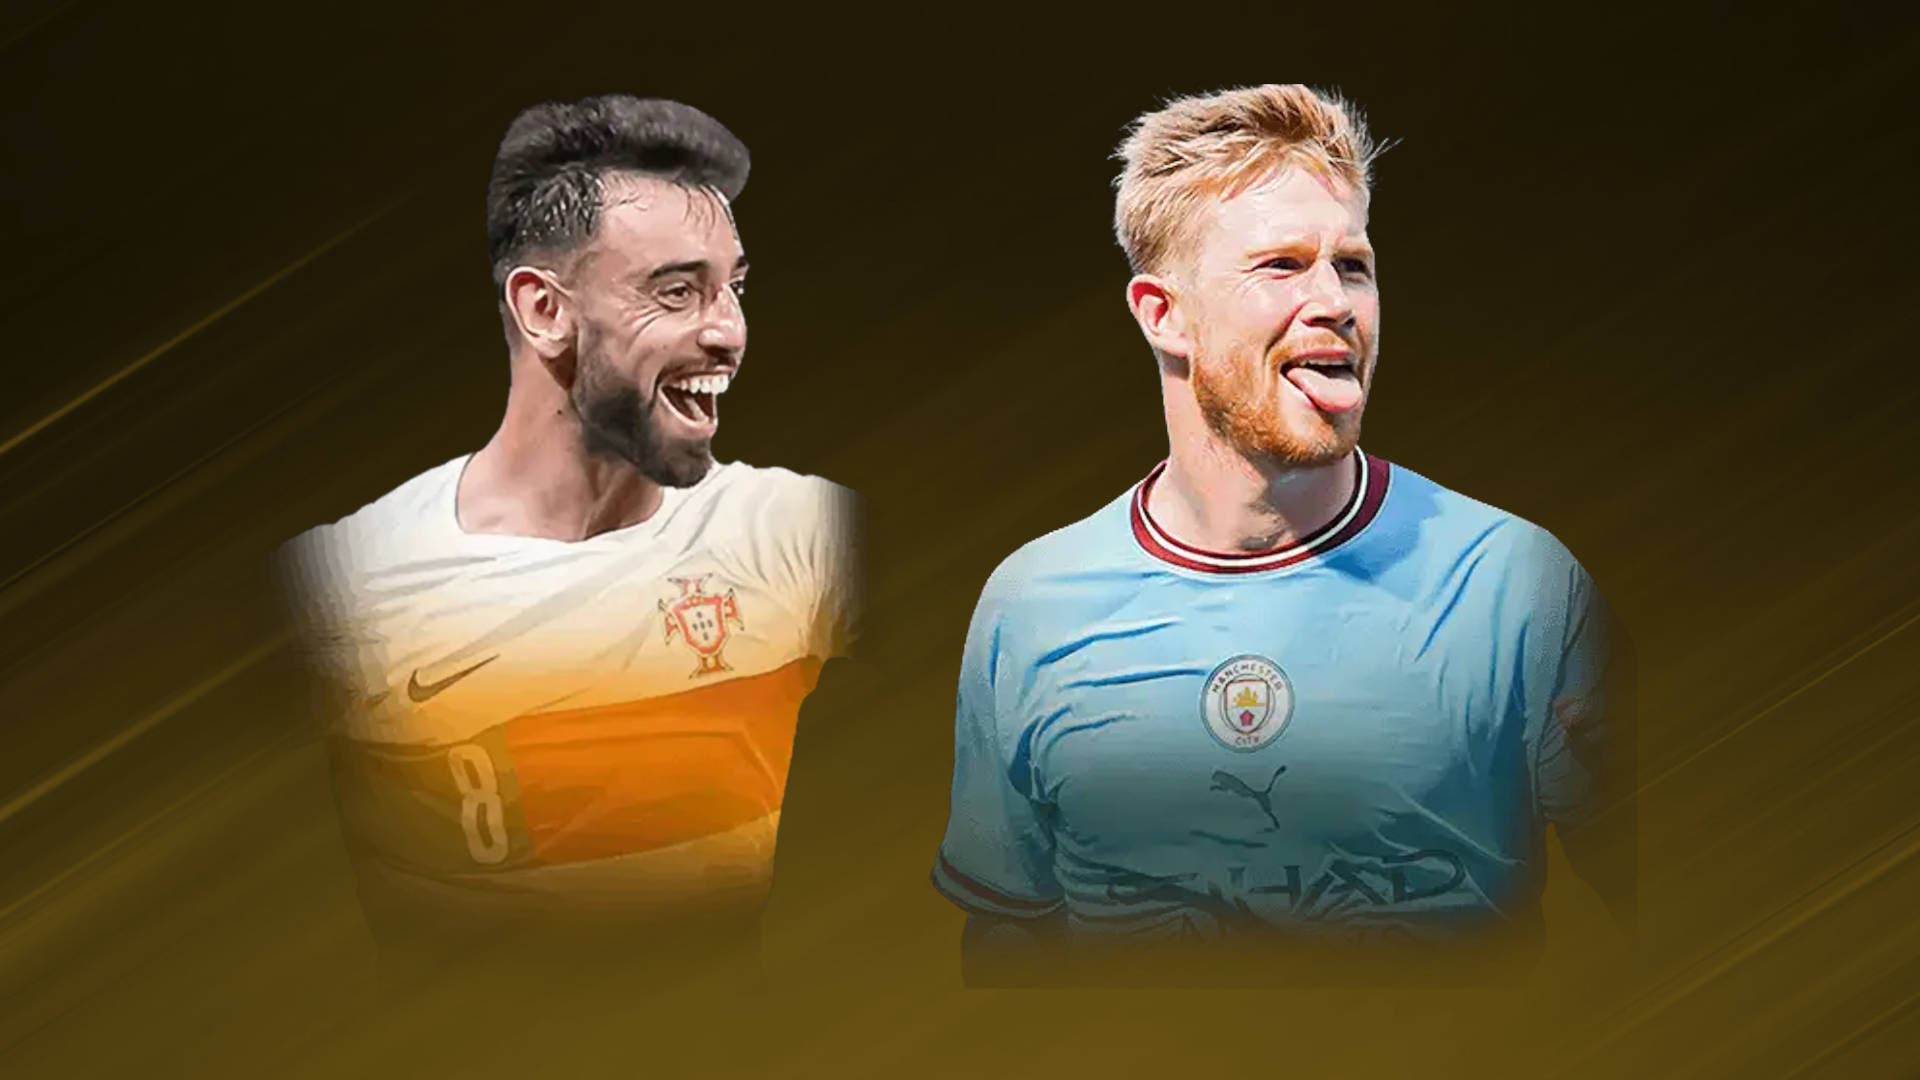 FIFA 23: TOTW 17 arrives with a featured IF from LaLiga Santander and De Bruyne as a star